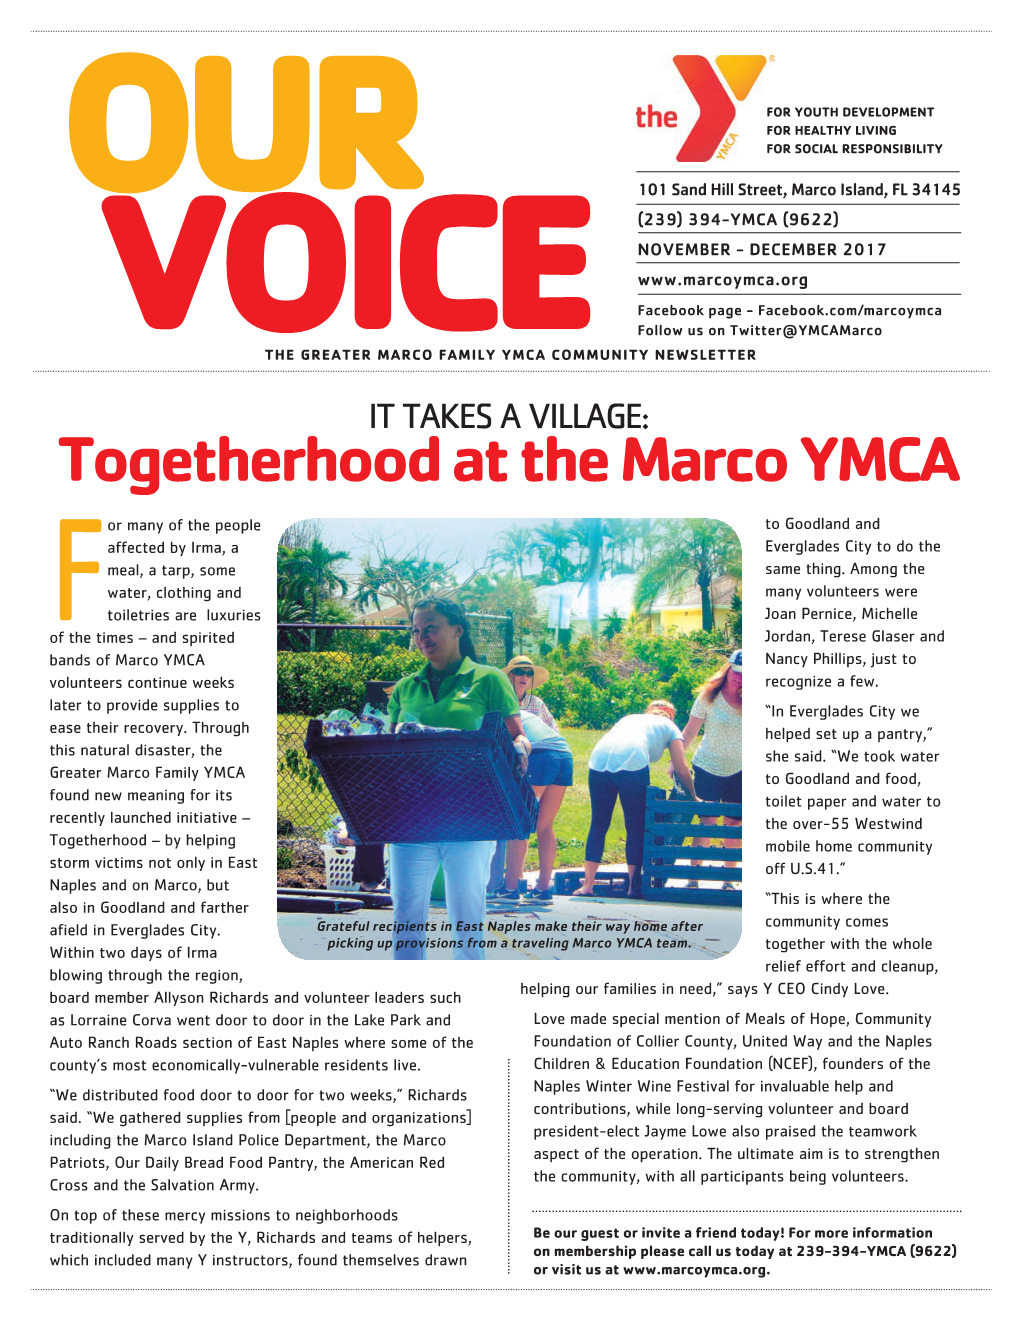 Togetherhood at the Marco YMCA